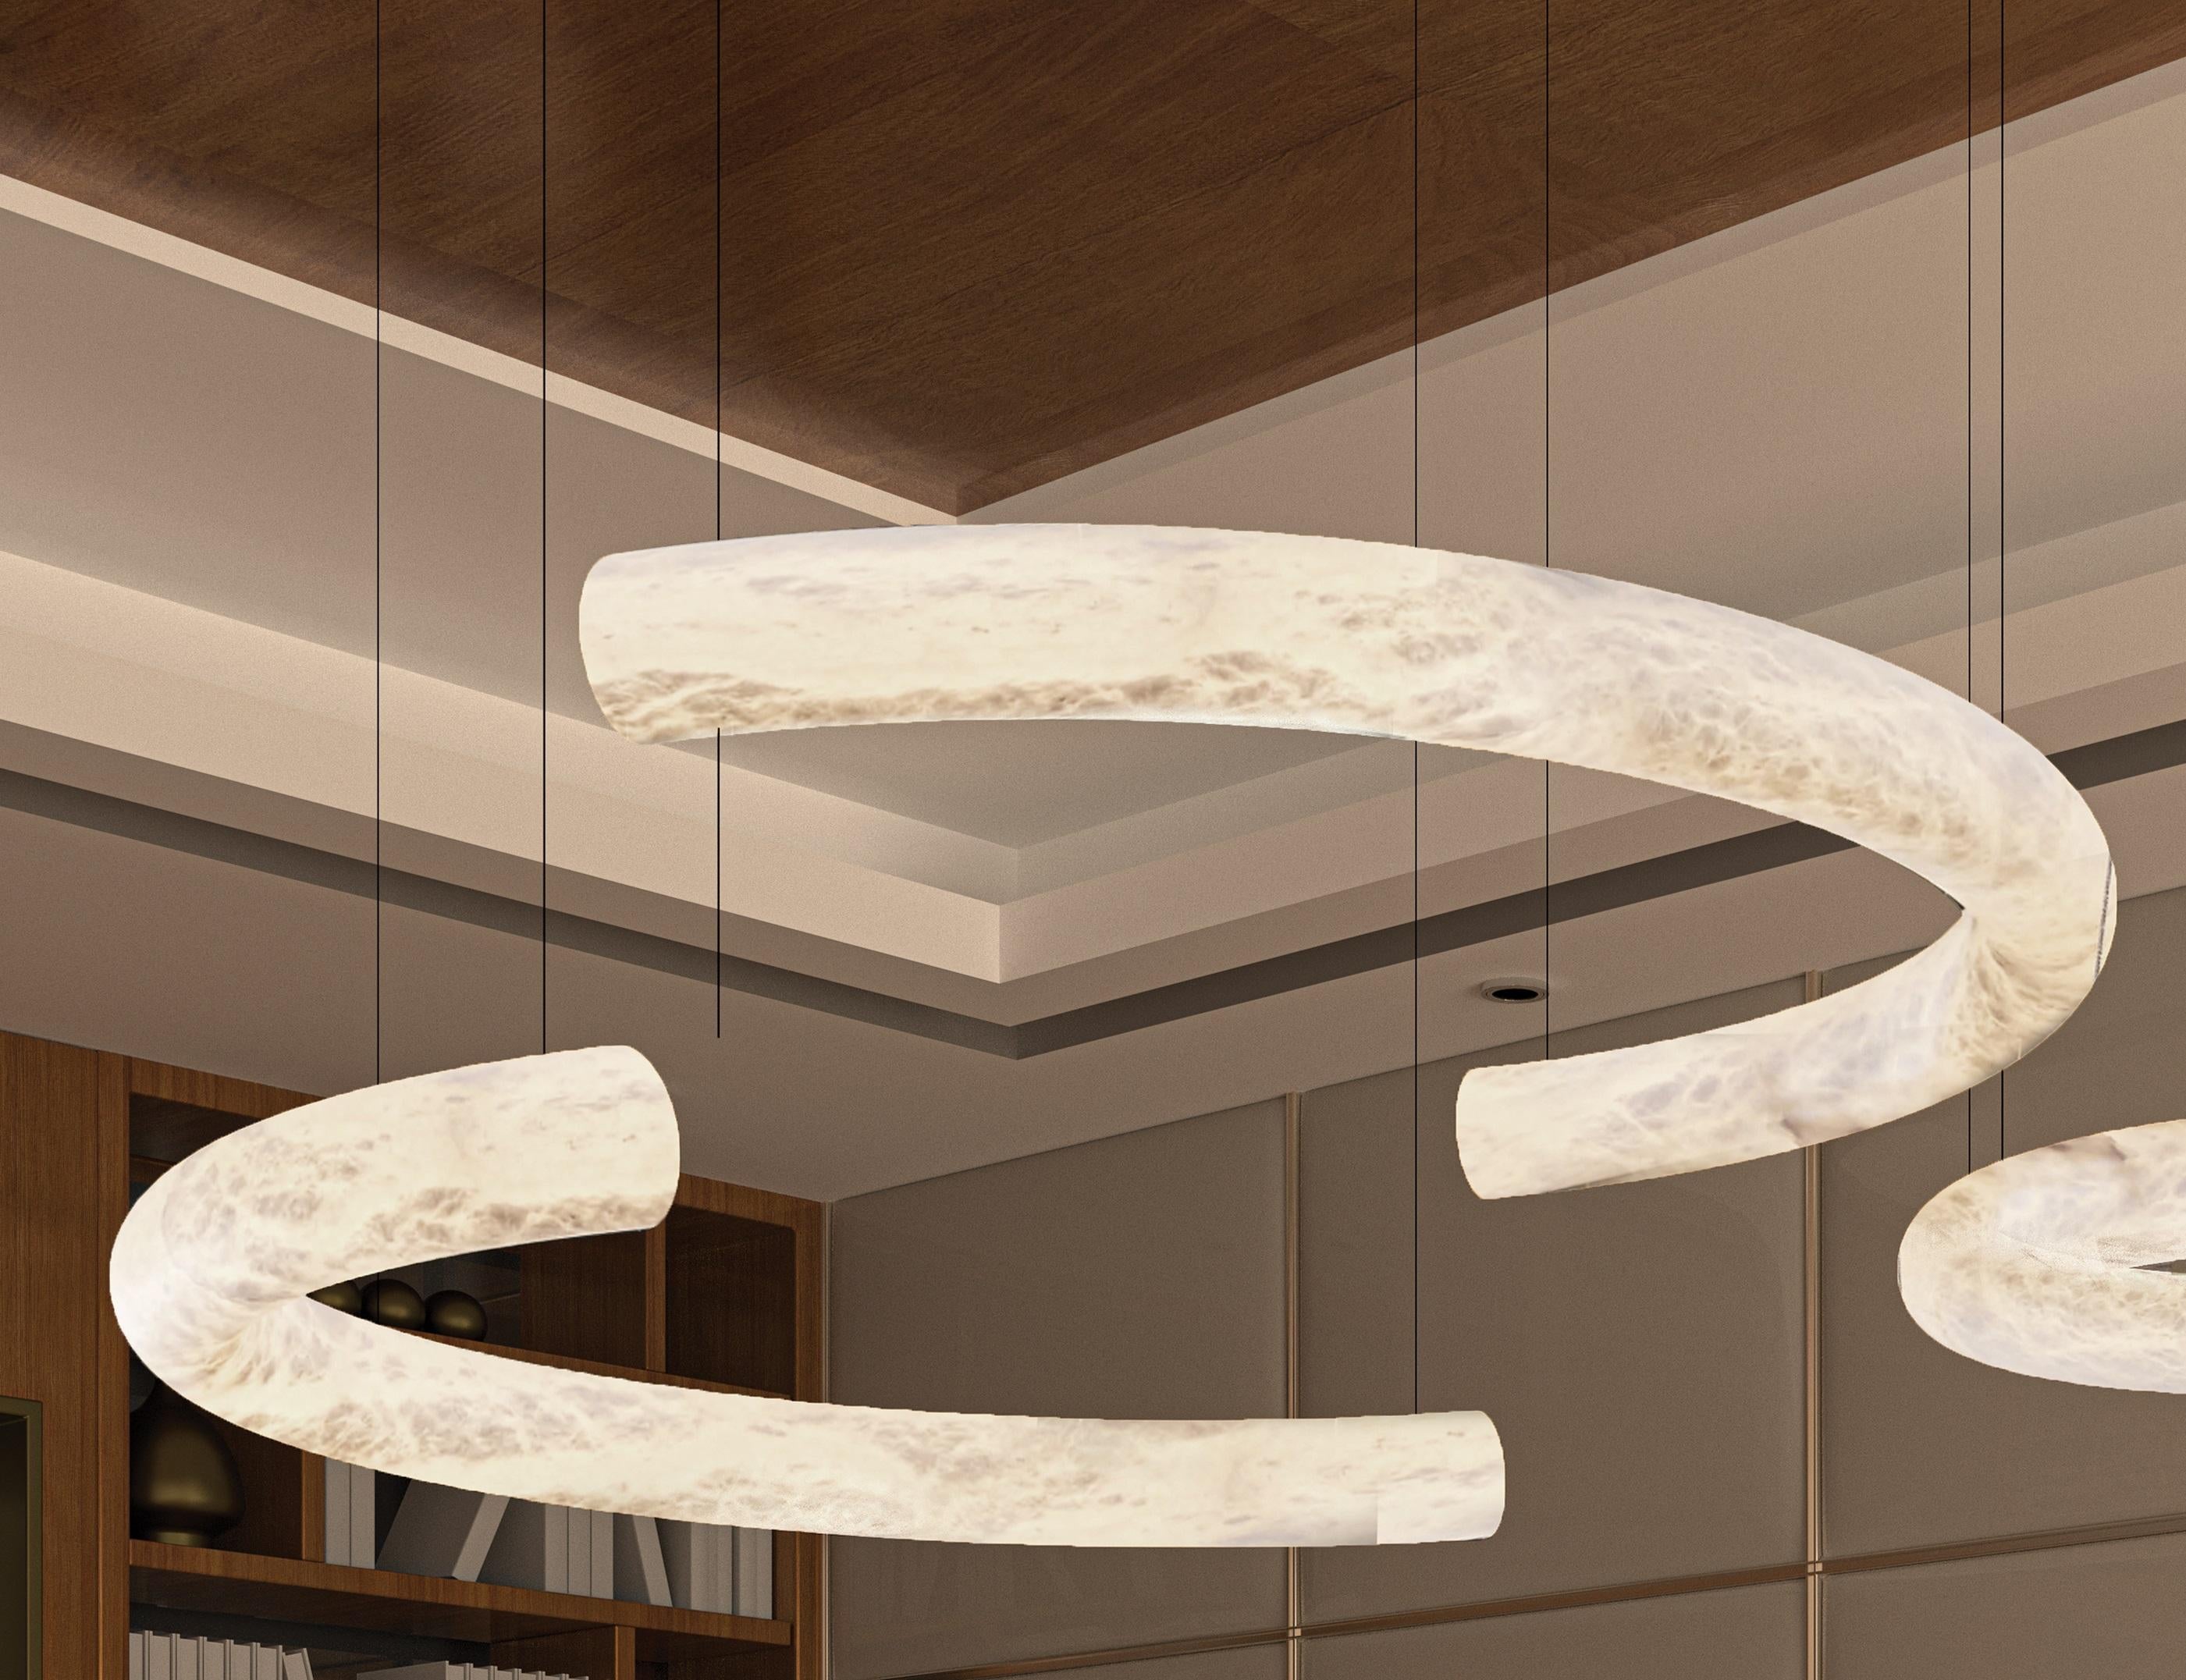 Futatsu Medium Suspension Lamp by Alabastro Italiano
Dimensions: Ø 80 x H 200 cm.
Materials: White alabaster and metal.

Available in different finishes: Shiny Silver, Bronze, Brushed Brass, Ruggine of Florence, Brushed Burnished, Shiny Gold,